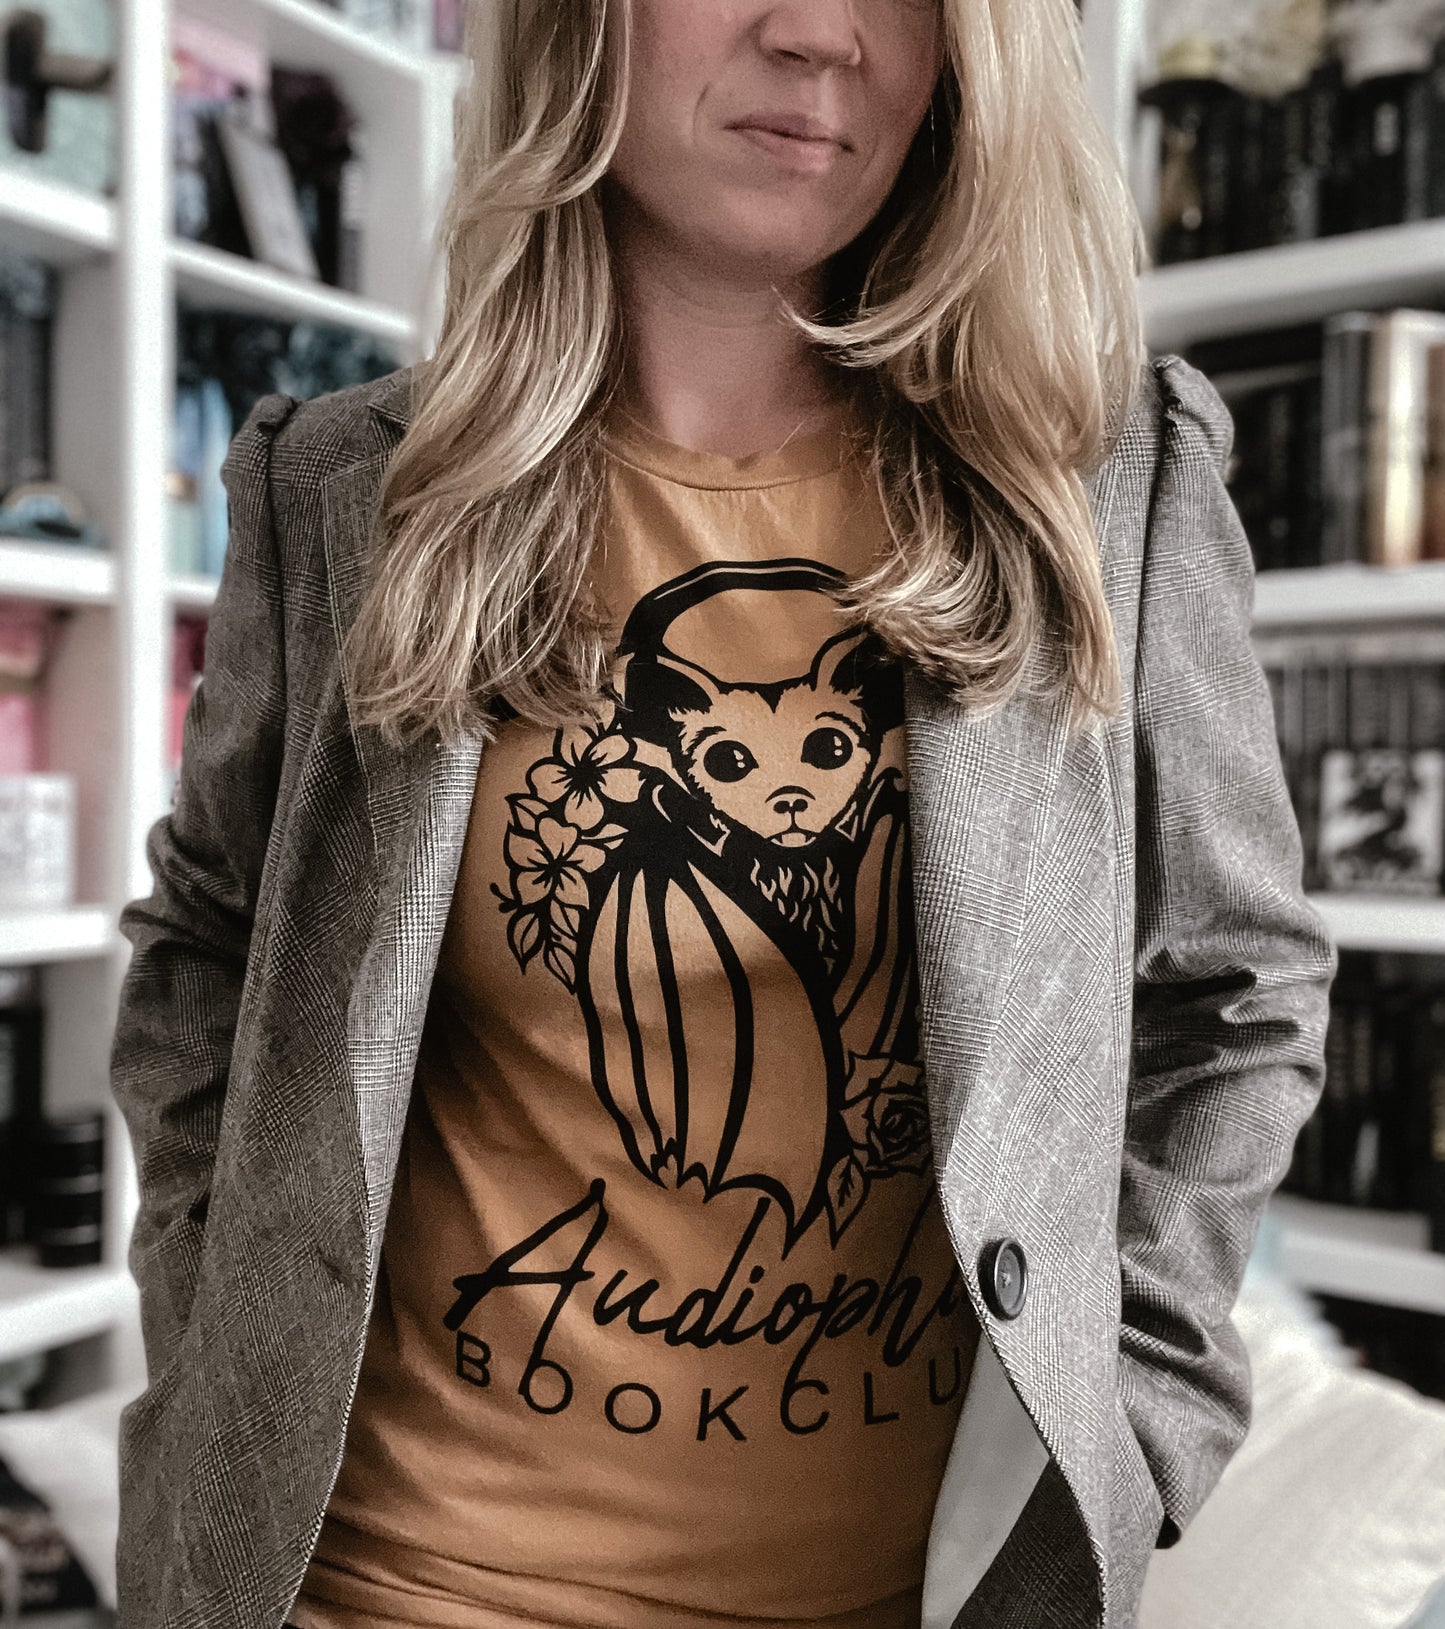 Audiophile Book Club Unisex t-shirt by FireDrake Artistry 